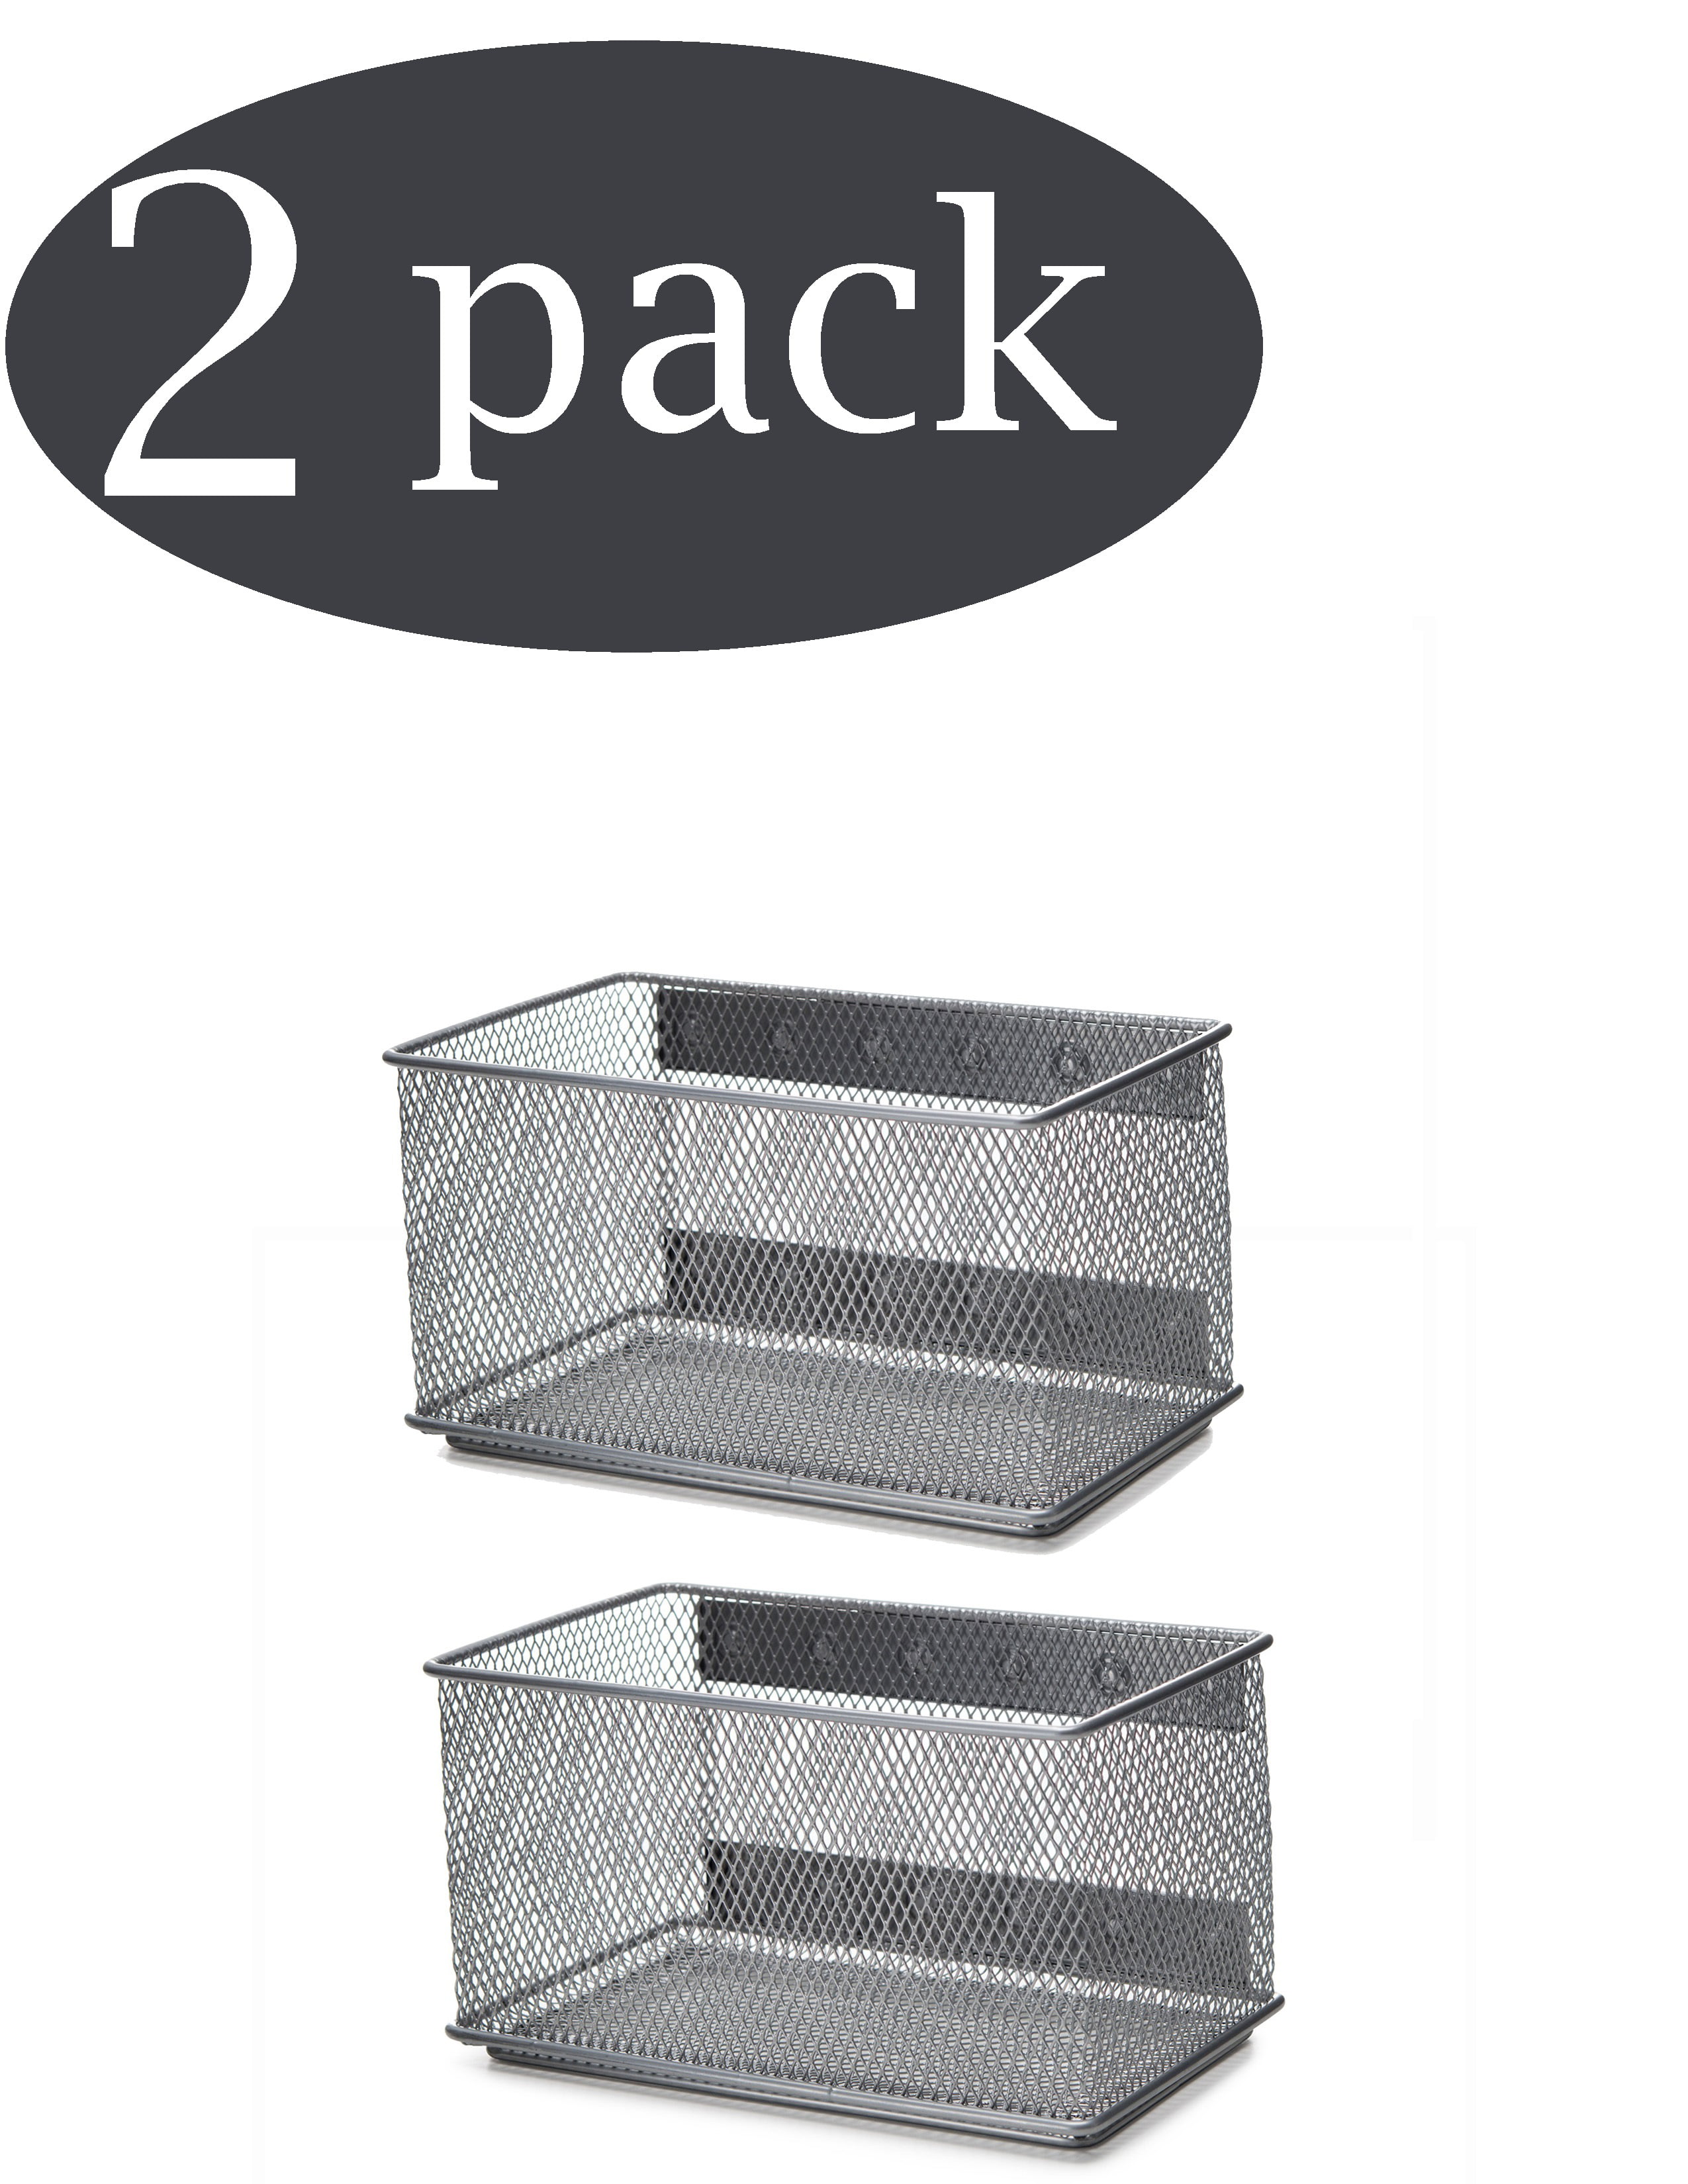 White 2 pack 2248vc-2 Trash Caddy Wire Mesh Magnetic Storage Basket 